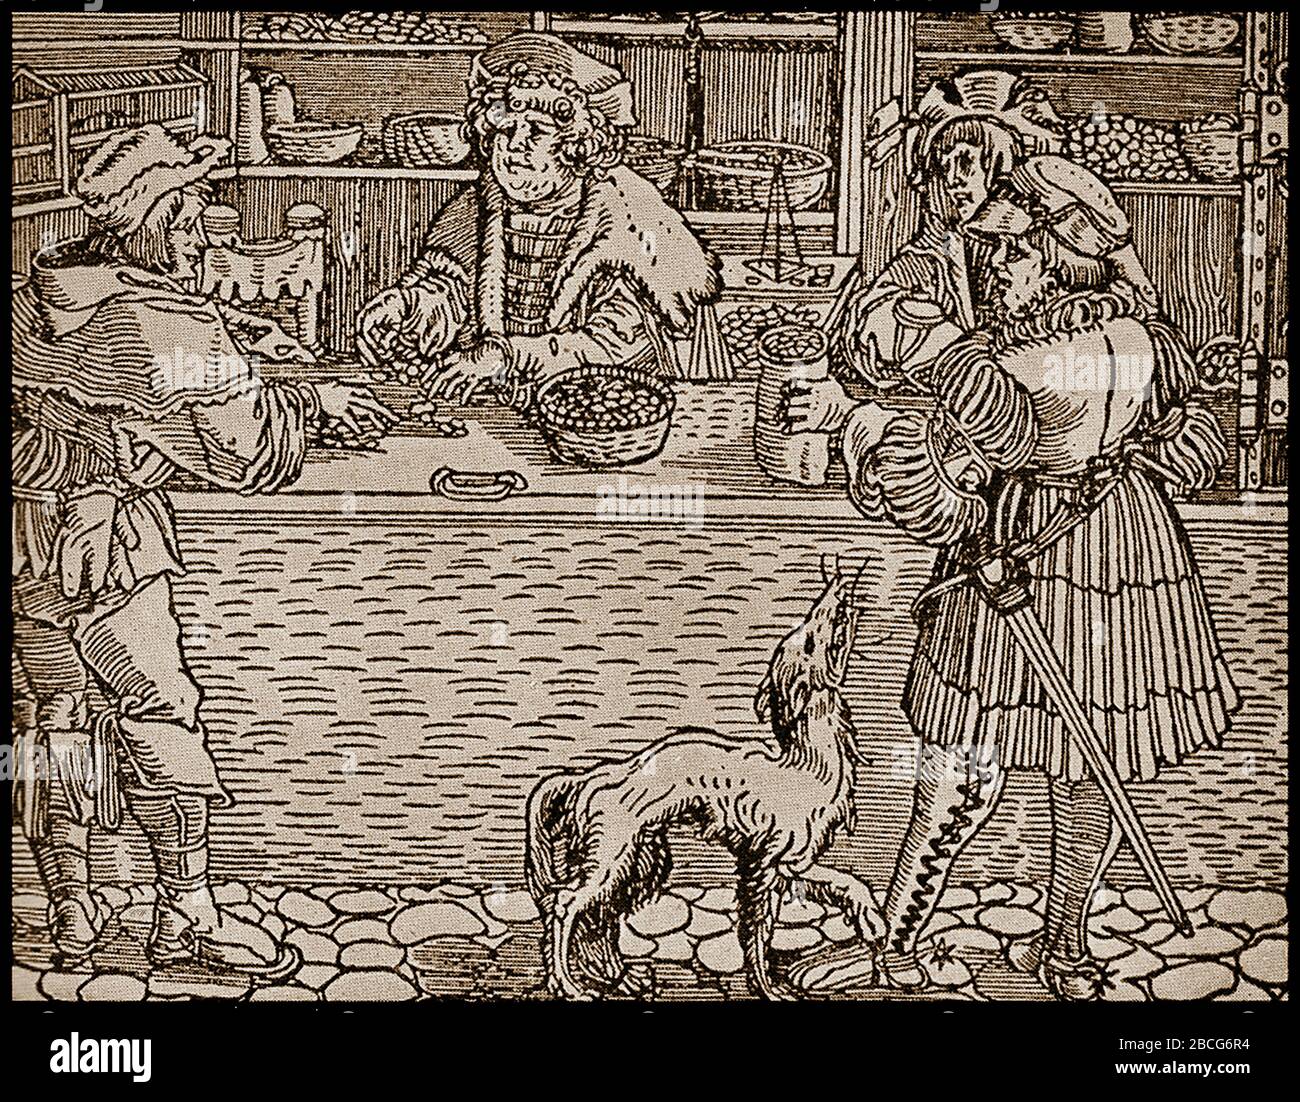 A medieval woodcut showing a money changers shop in Britain. In Europe they would sit on  benches  or bancas at markets etc, giving us the modern terms bank and banker. The scales in the picture were used to verify the amount of precious metal in coinage. Those that operated from premises would make loans and give credit bills. Stock Photo